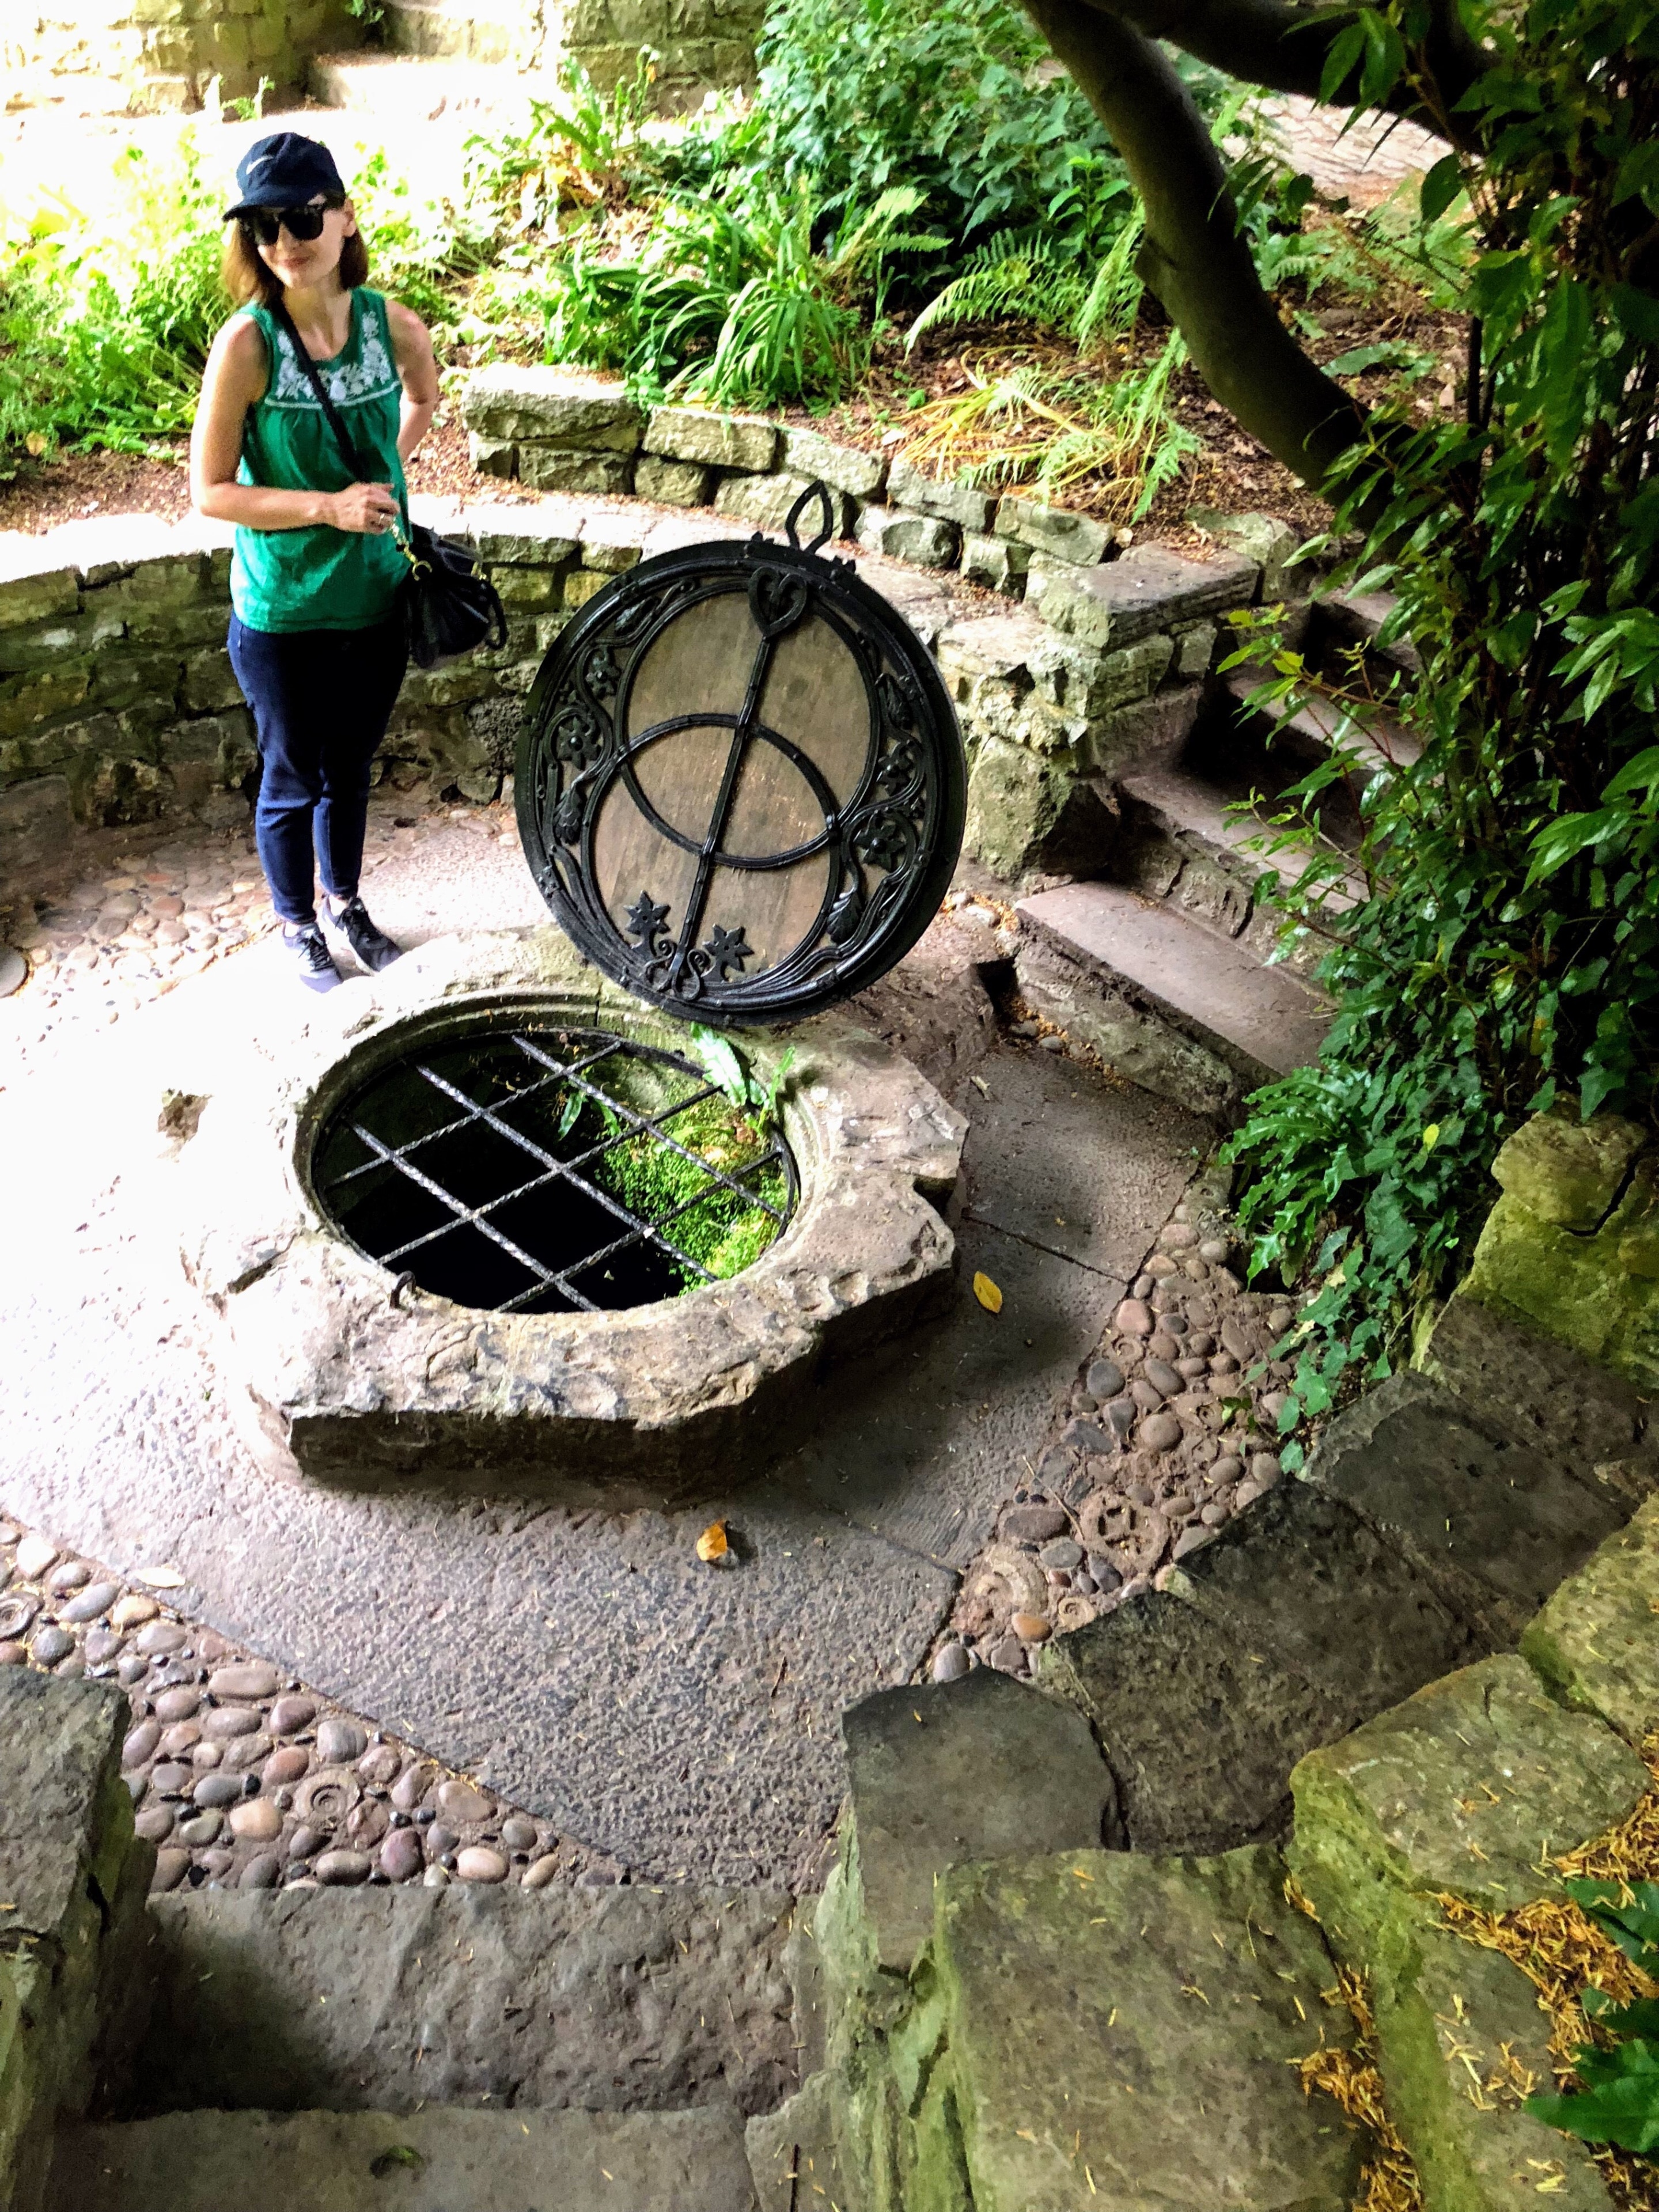 The tranquil Chalice Well in Glastonbury, U.K.